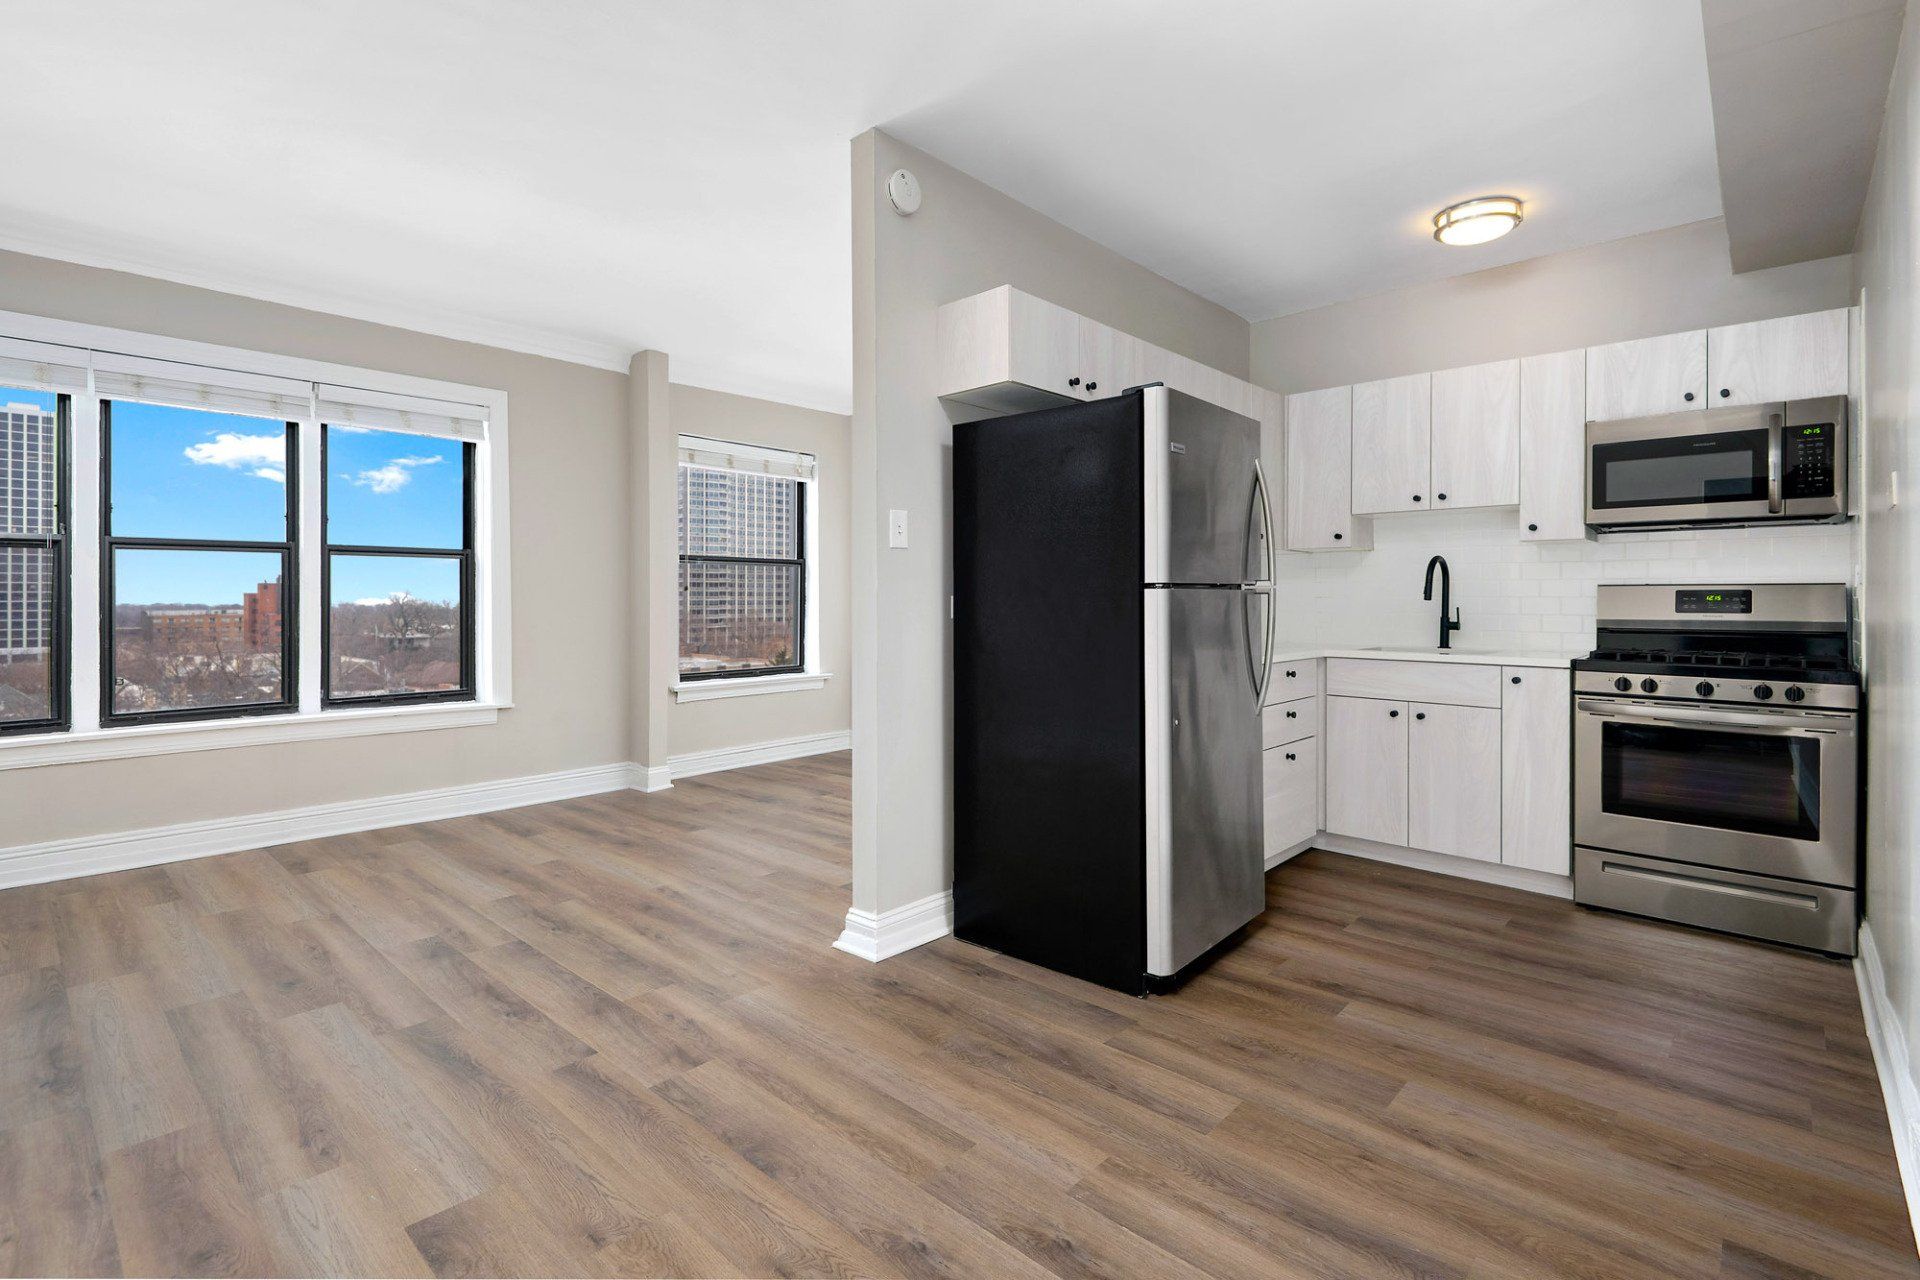 A kitchen with stainless steel appliances and a black refrigerator at Reside on Clarendon.